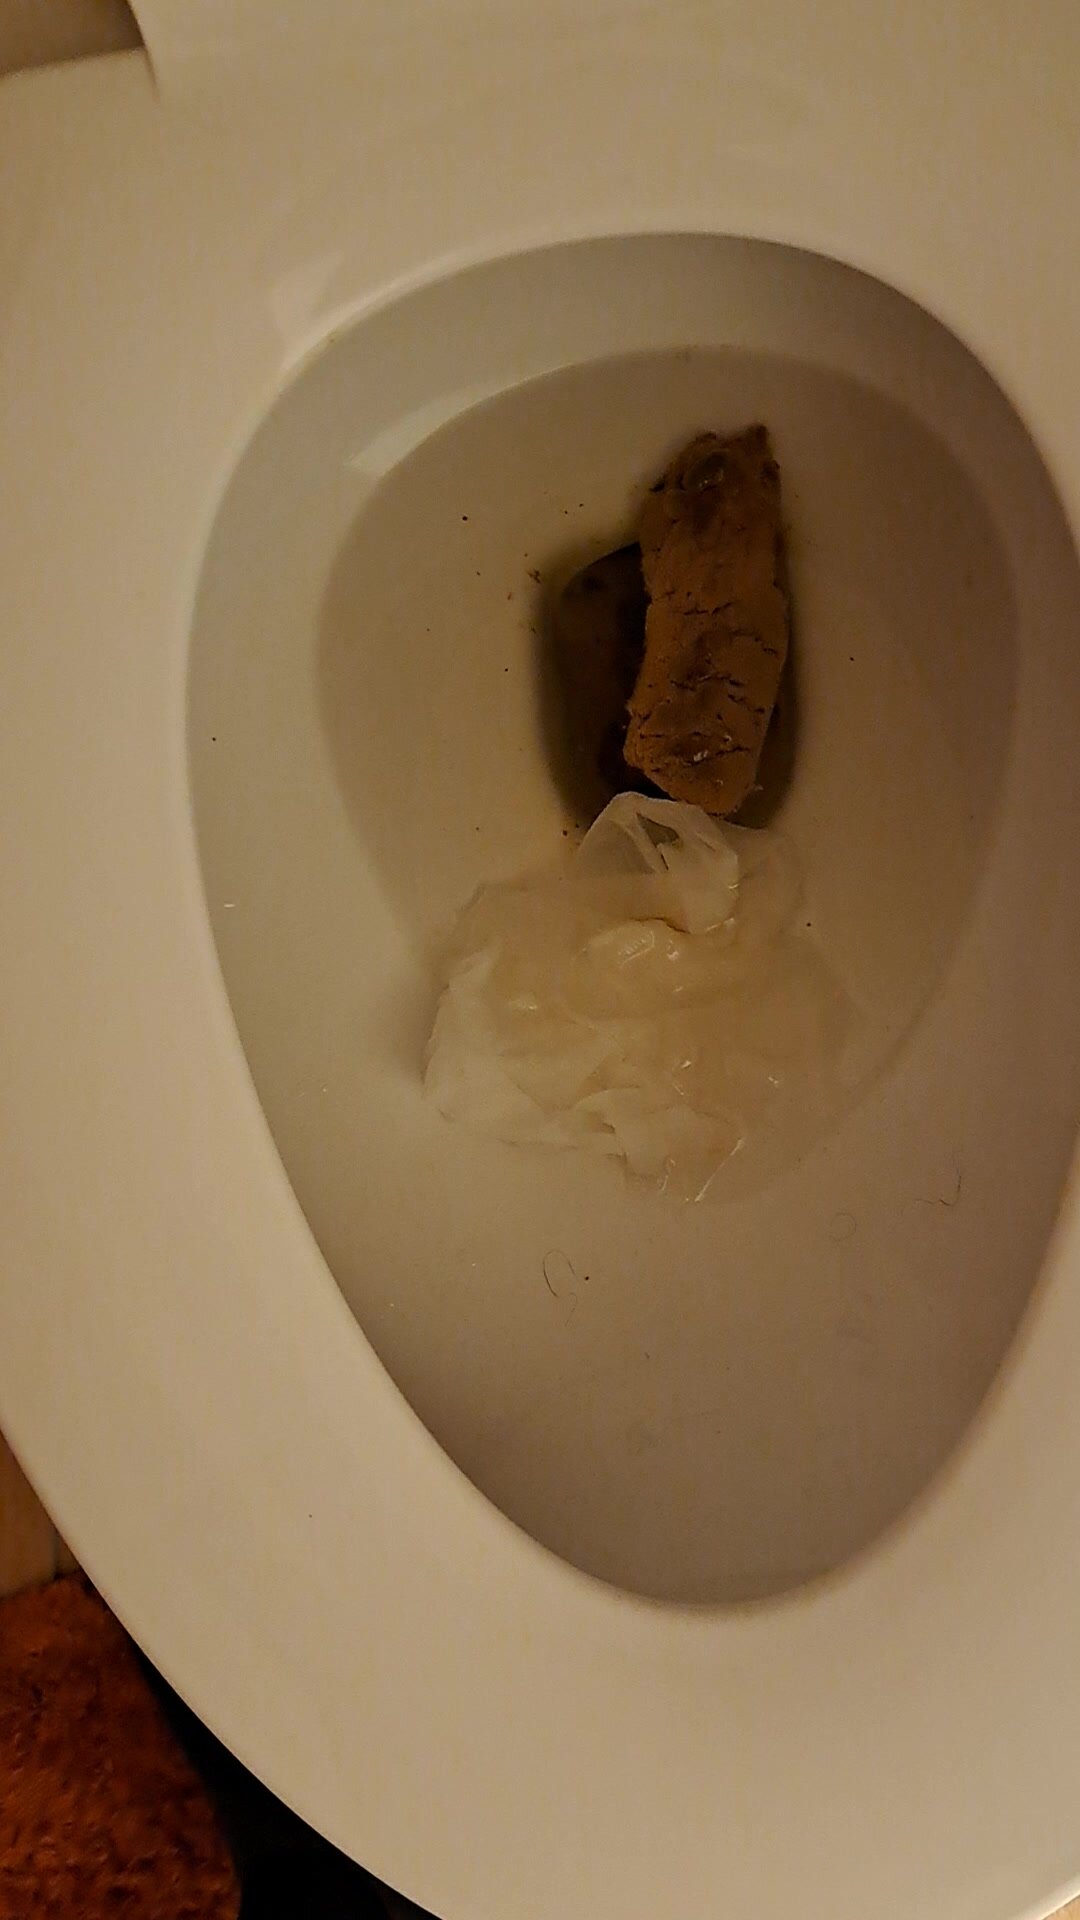 Thick solid poop while standing up flush